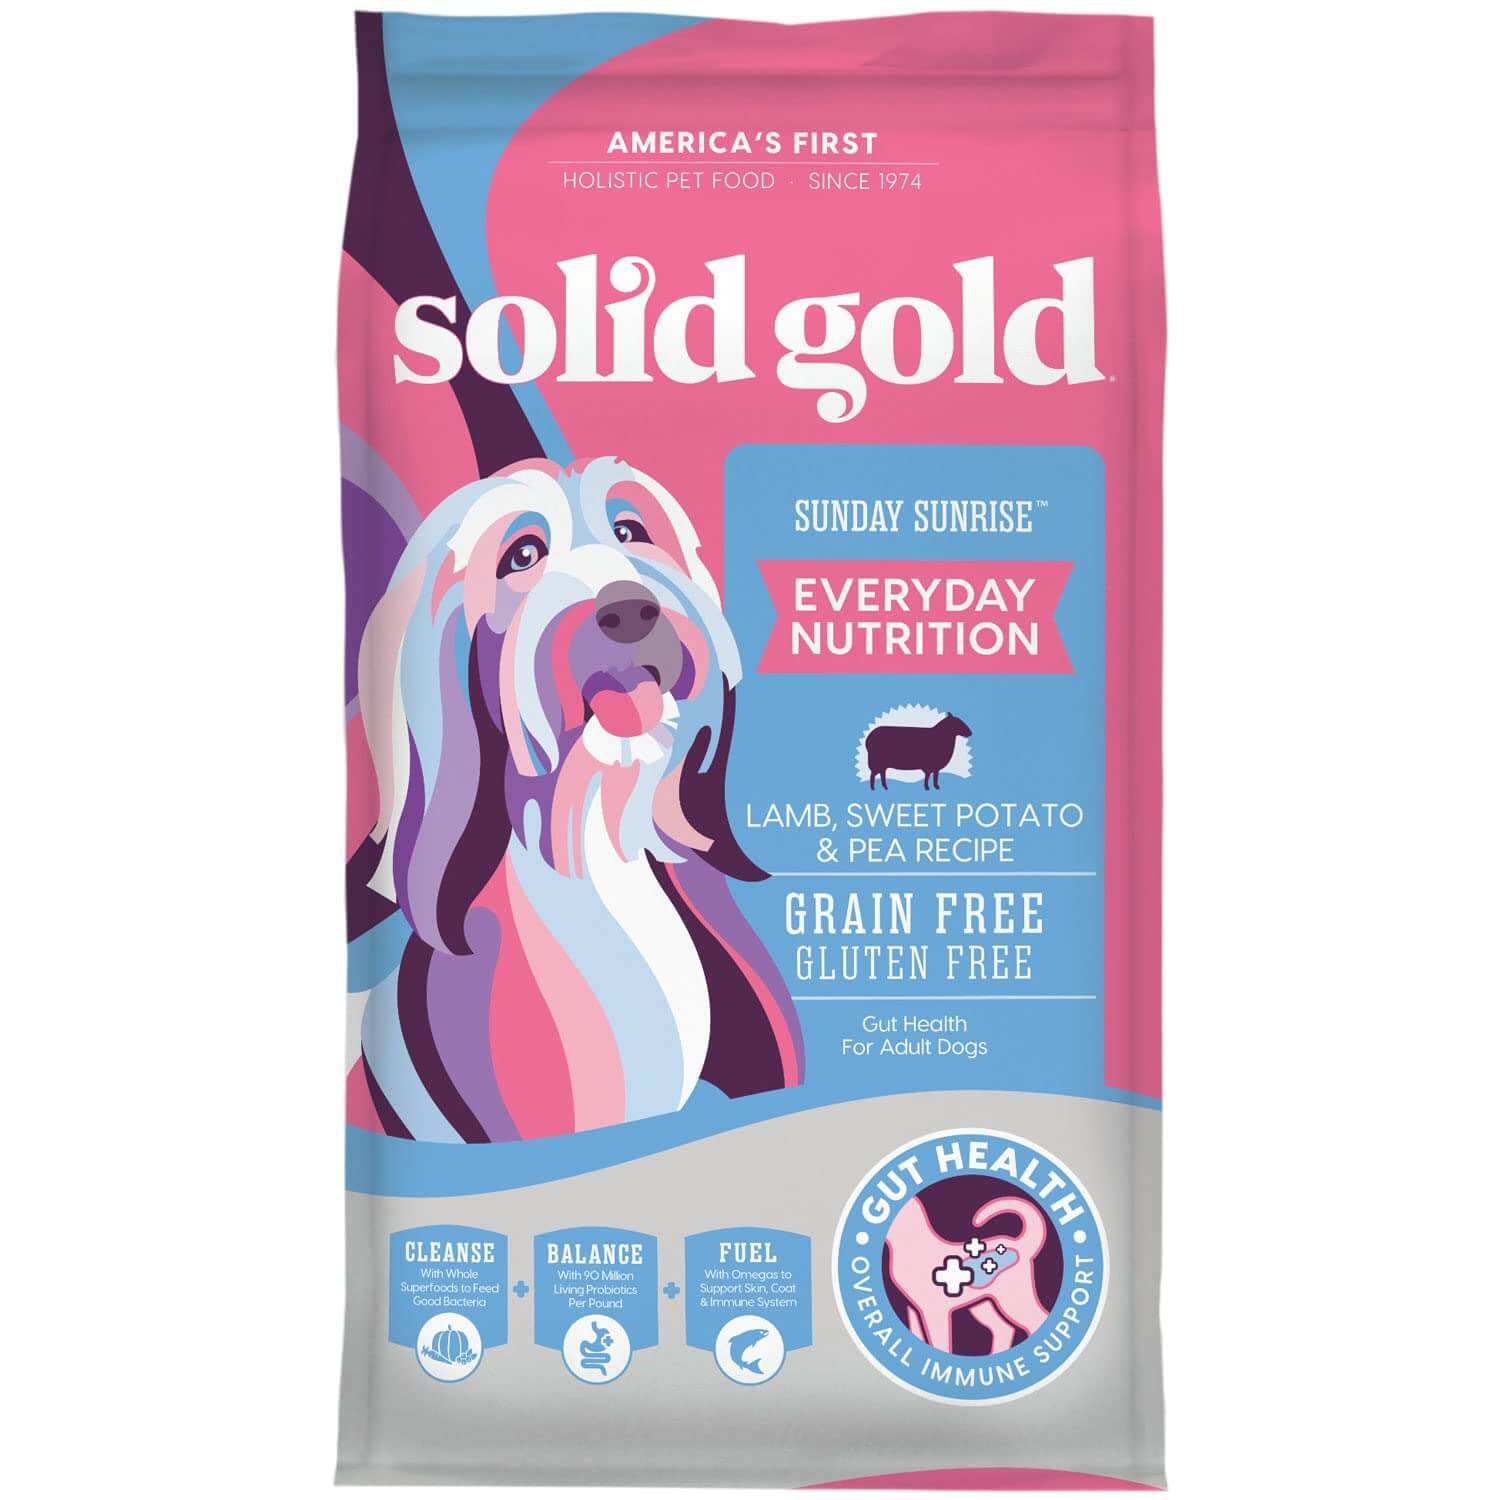 Solid-Gold-Sunday-Sunrise-Dry-Dog-Food-Review